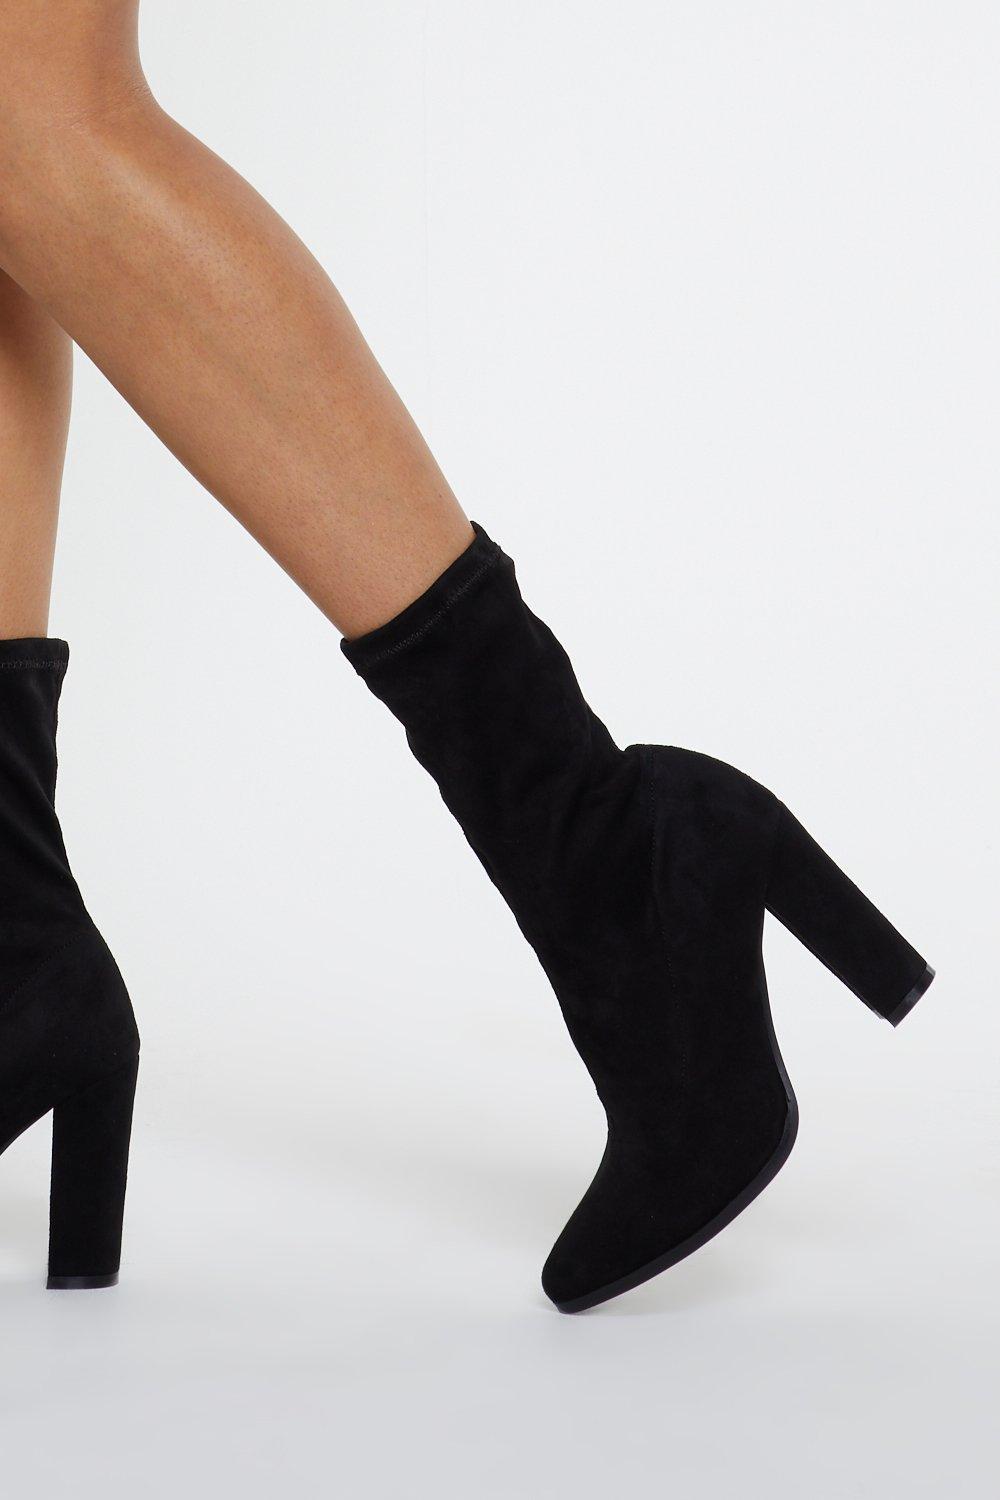 suede black sock boots